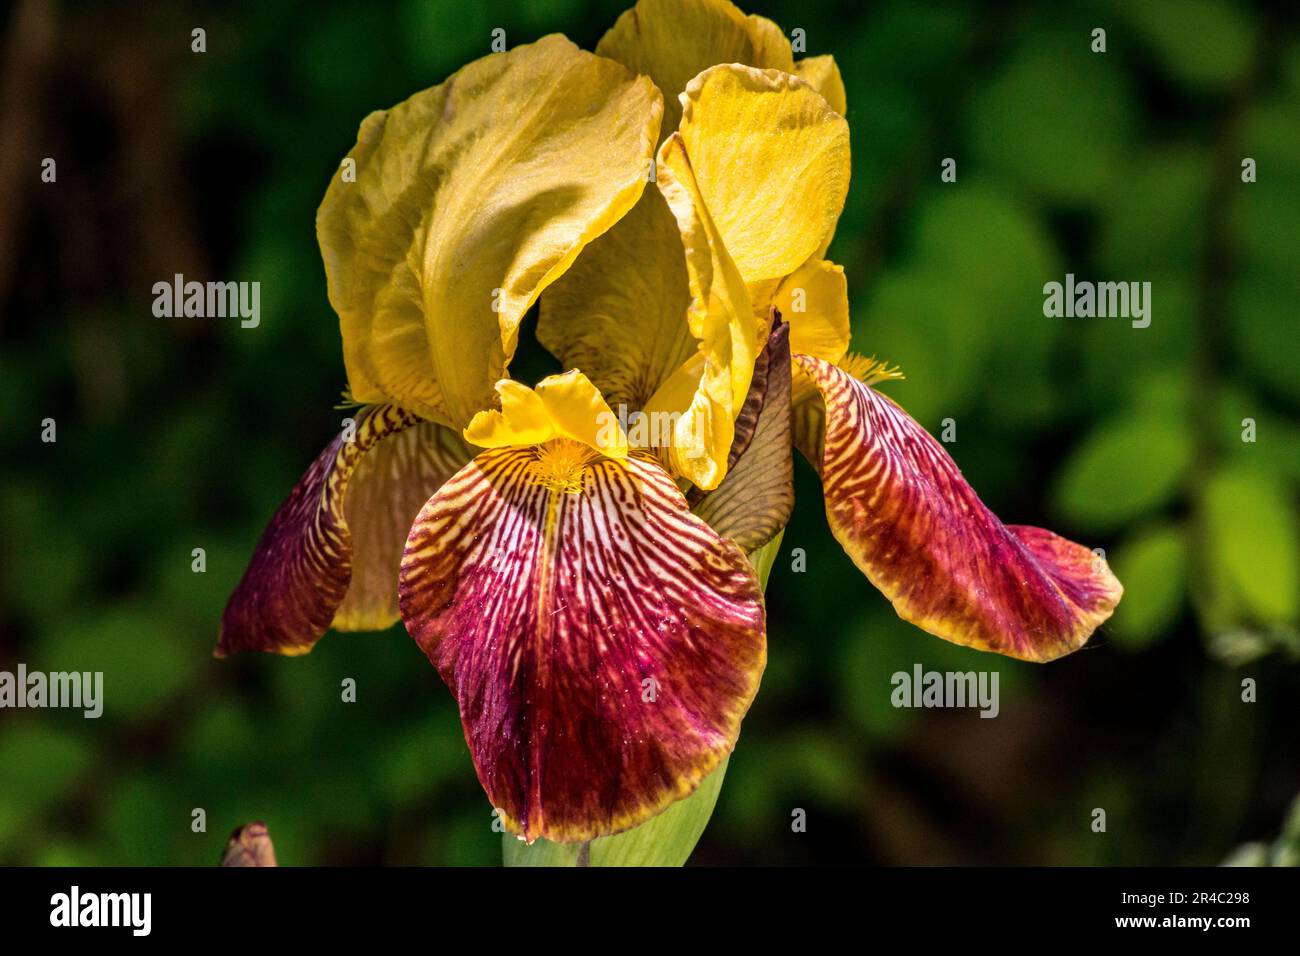 A vibrant yellow and deep red iris flower stands amidst lush green foliage and bushes in a garden. Stock Photo